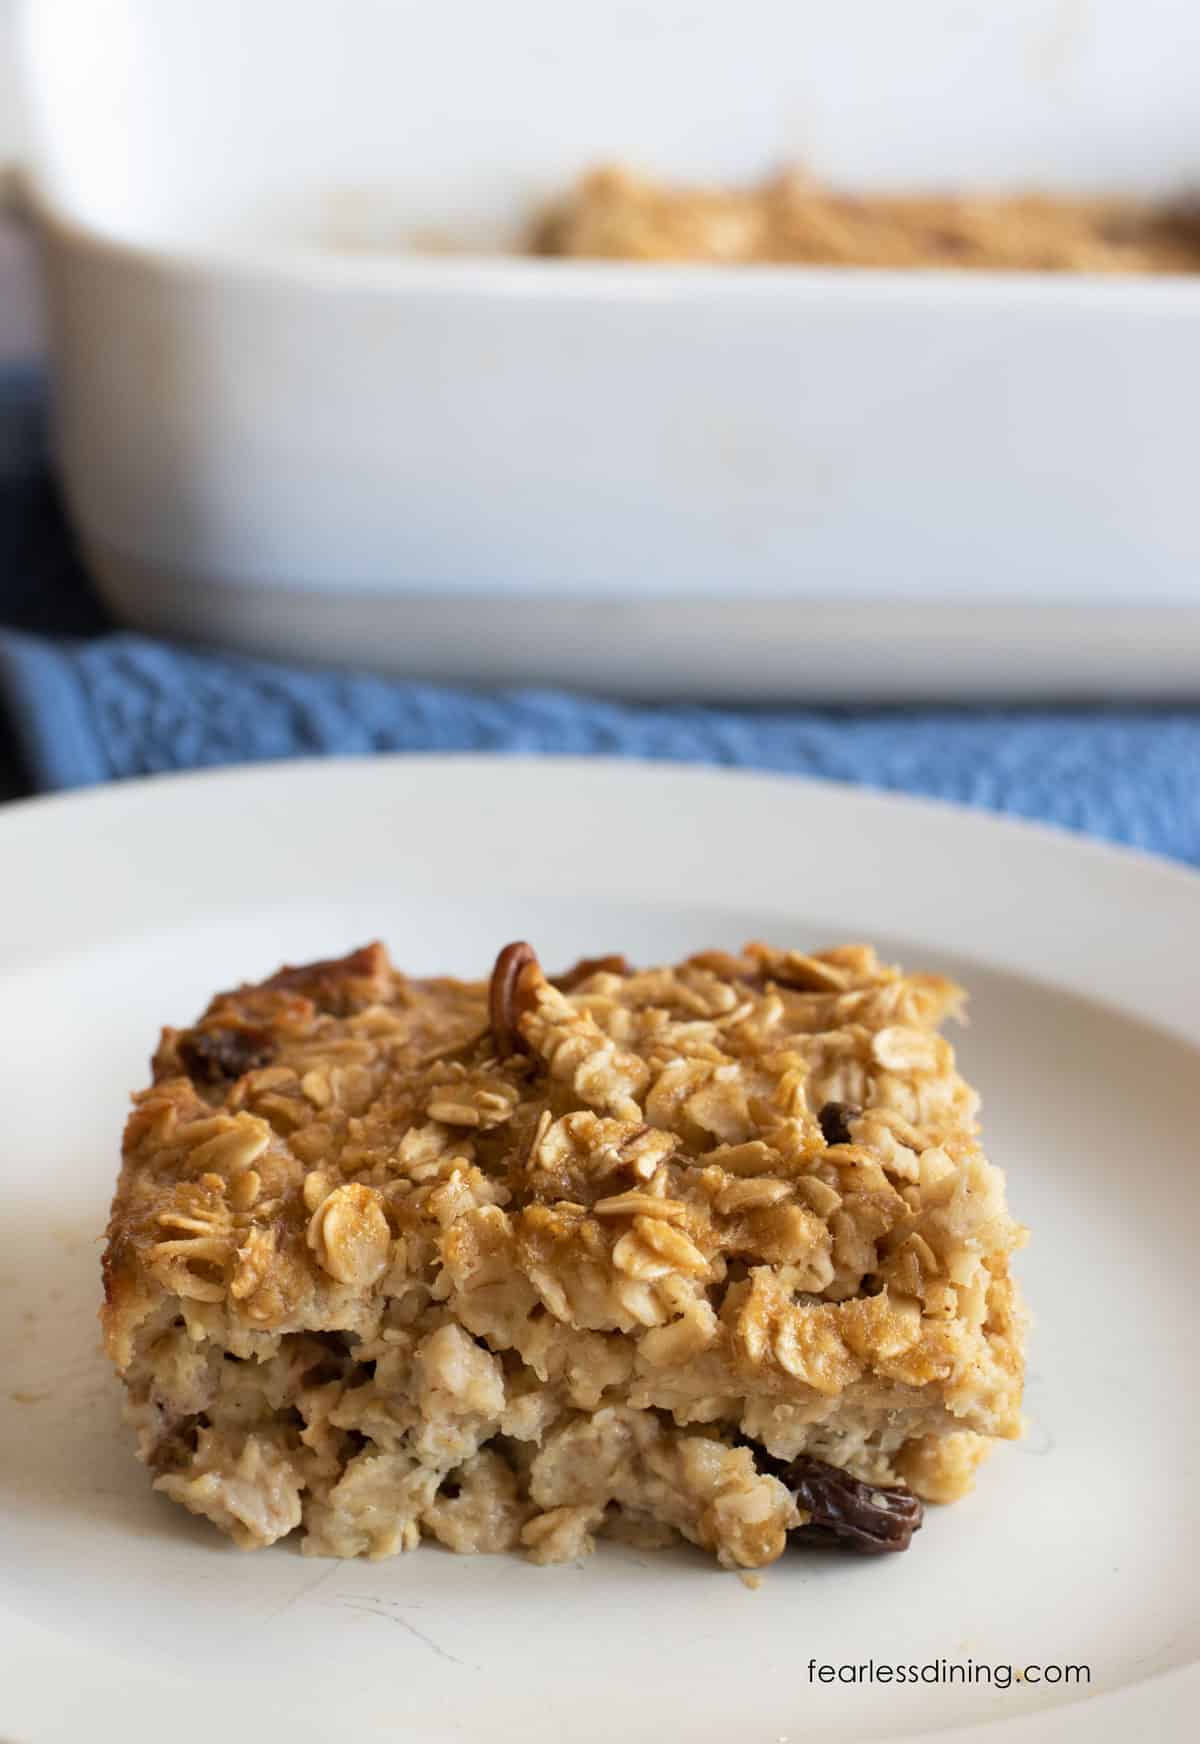 A serving of bake oatmeal on a plate.